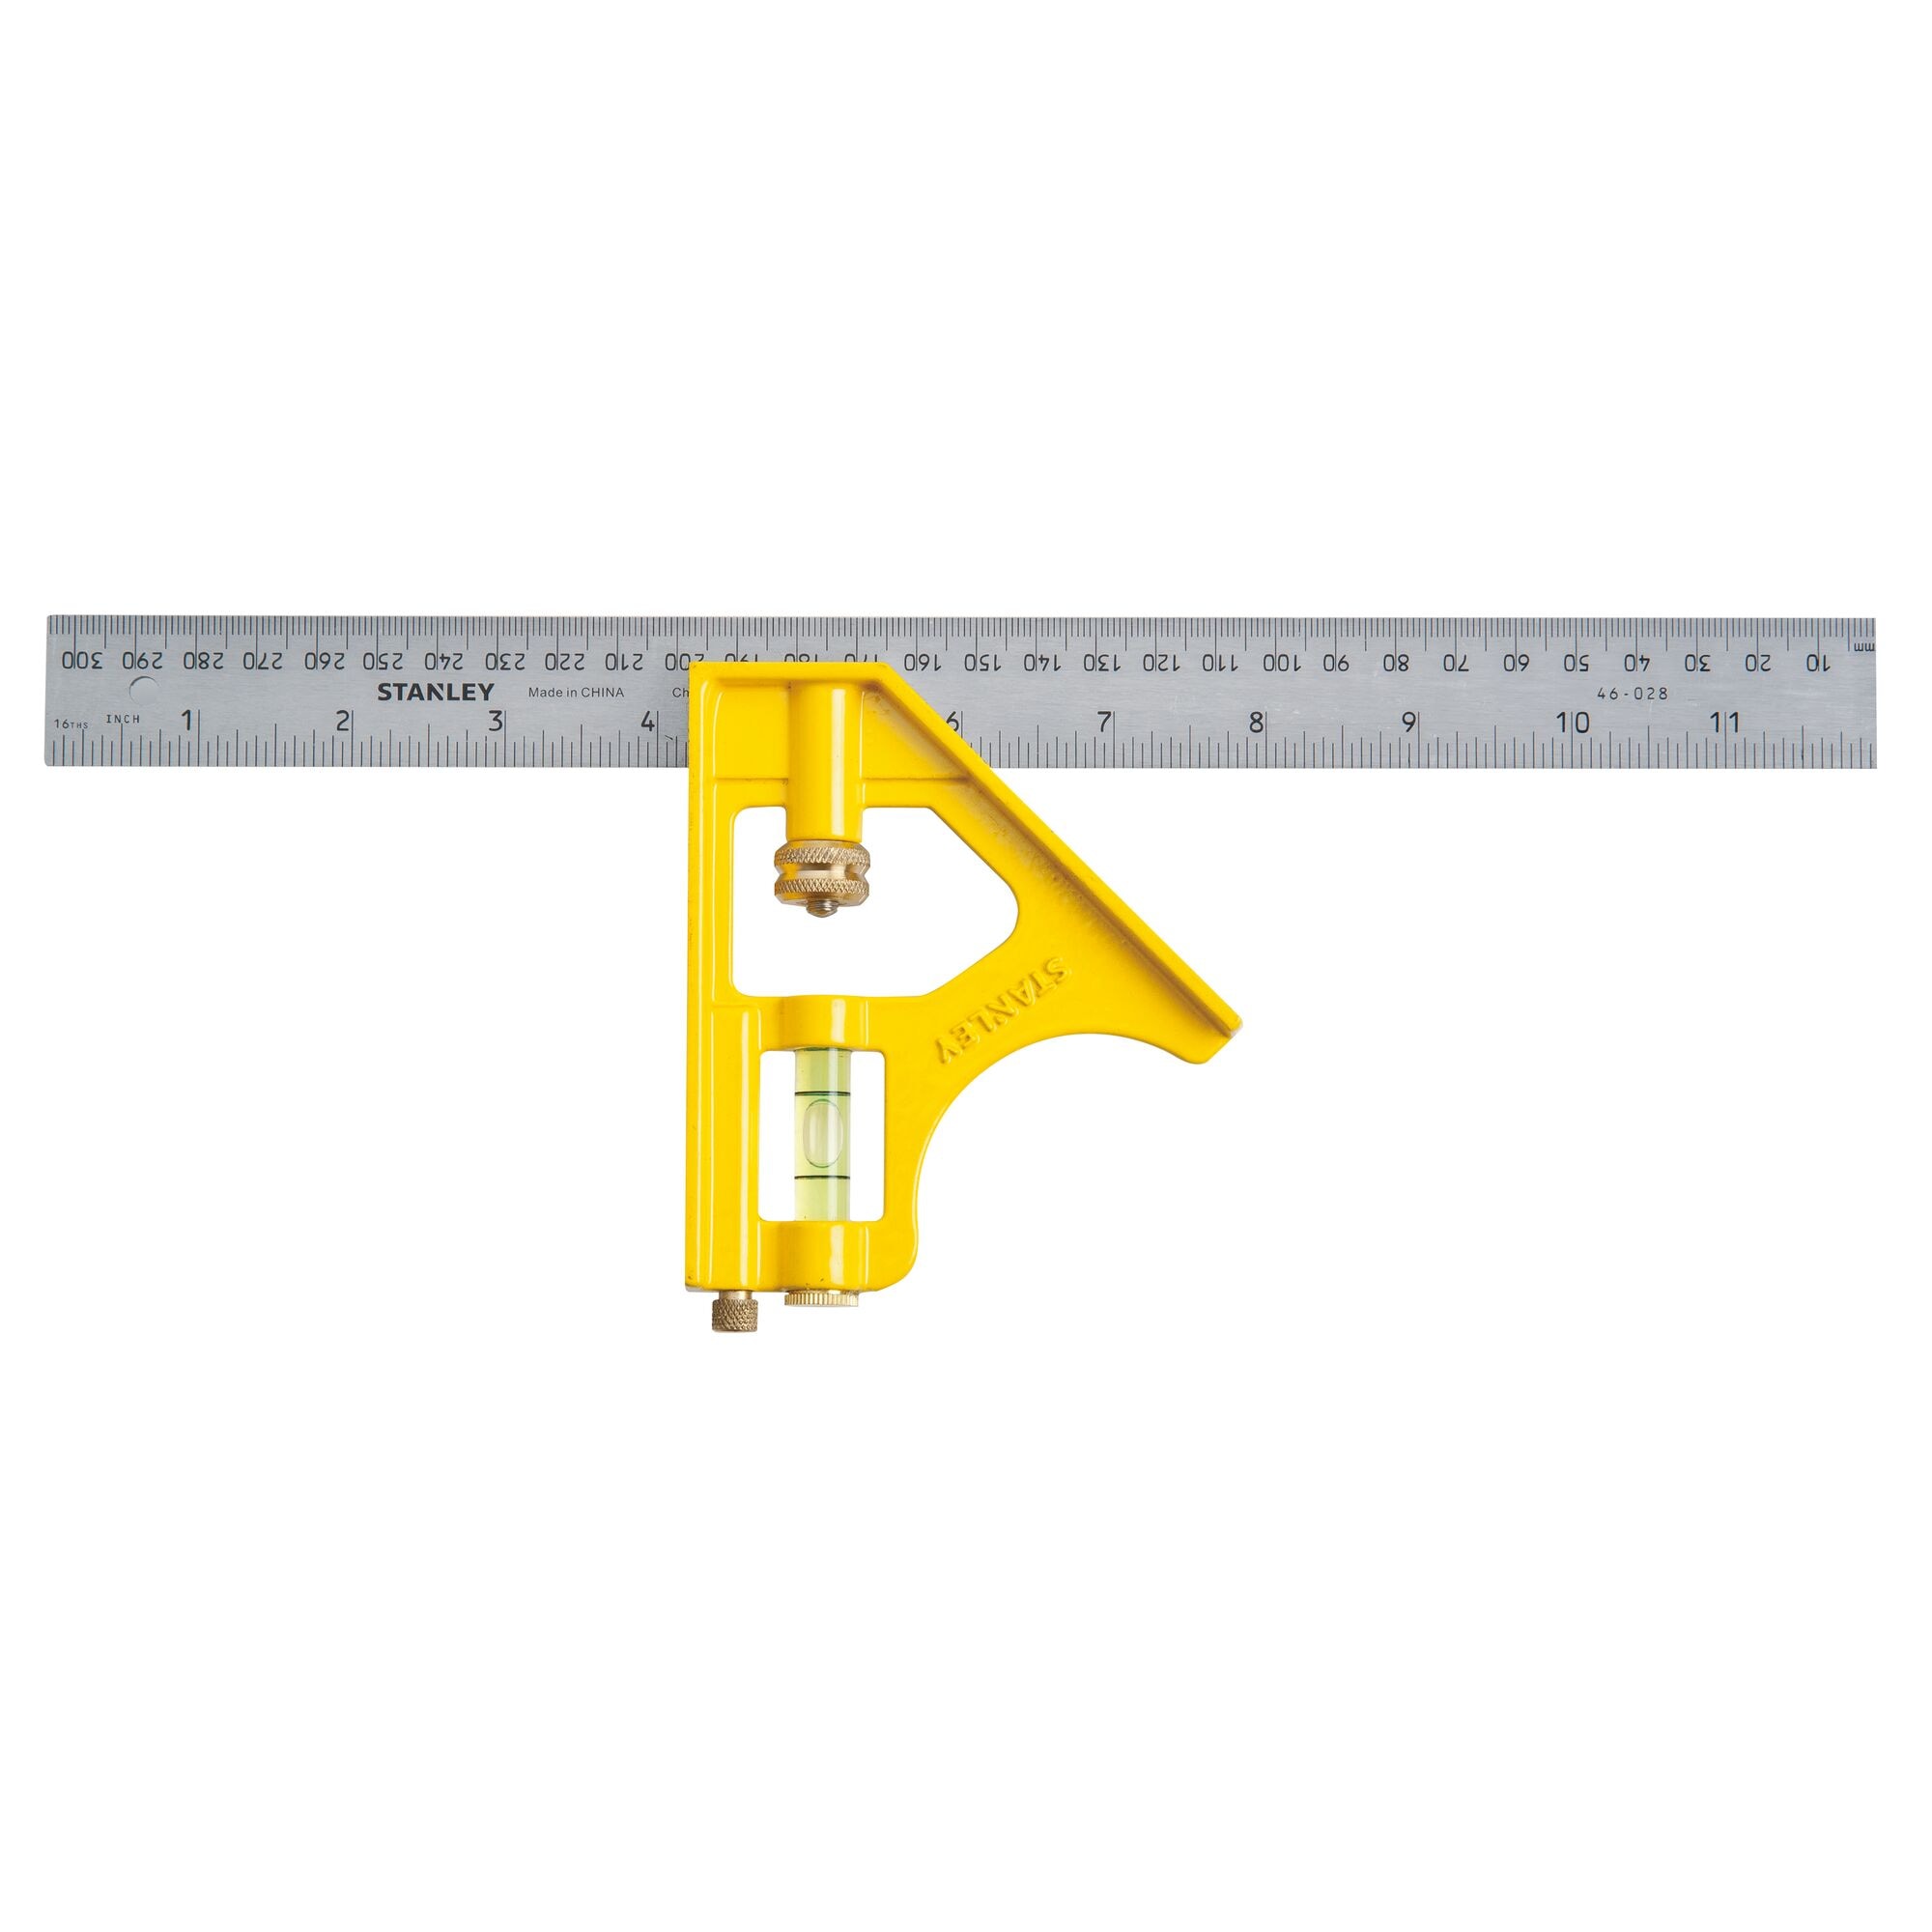 Stanley 46-024 Combination Square BRAND NEW 